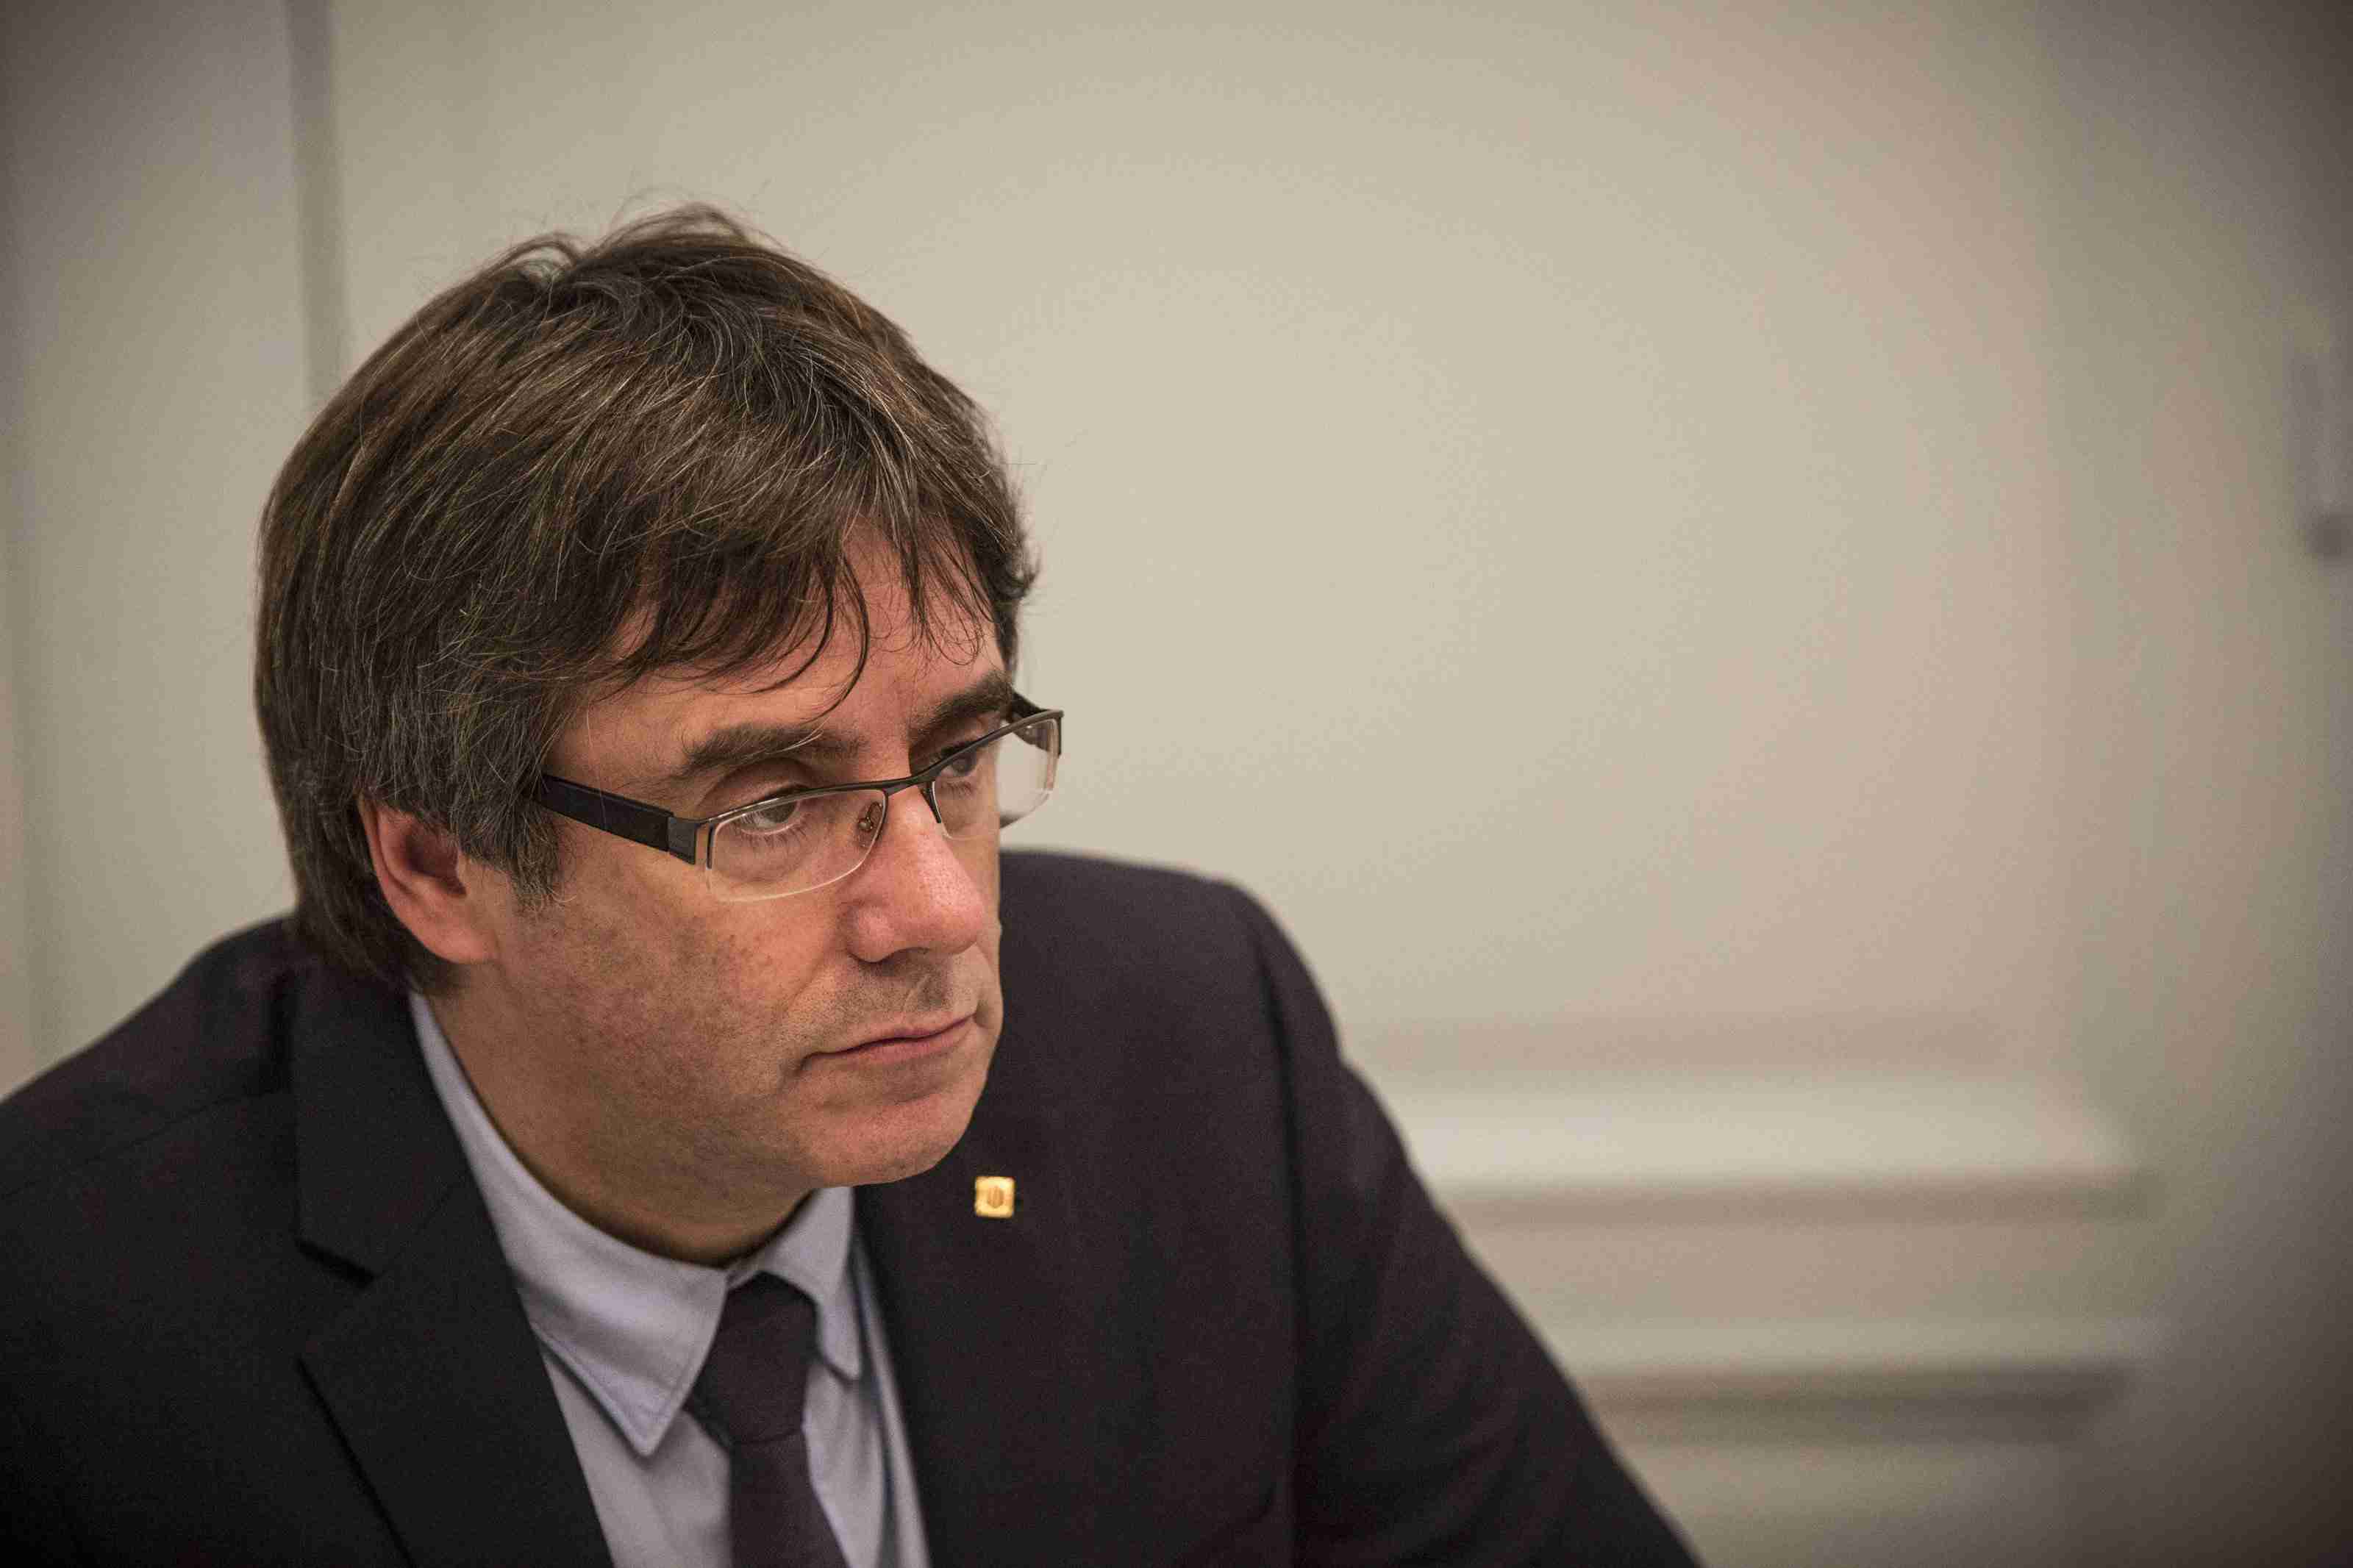 Puigdemont: "Did the disloyalty of the security service prevent an attack from being avoided?"